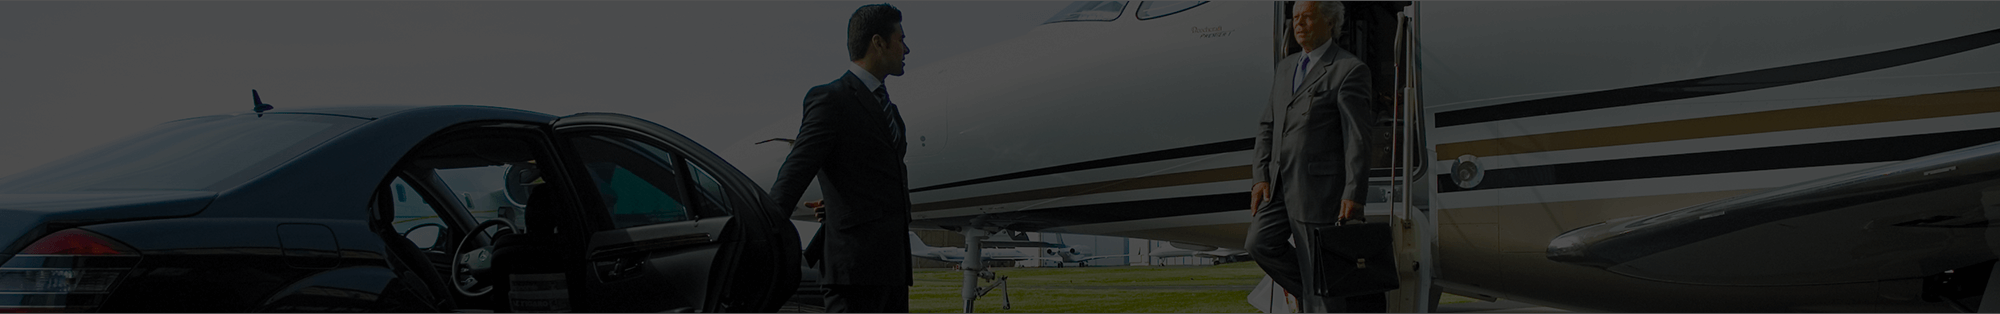 Funeral Transfers header image